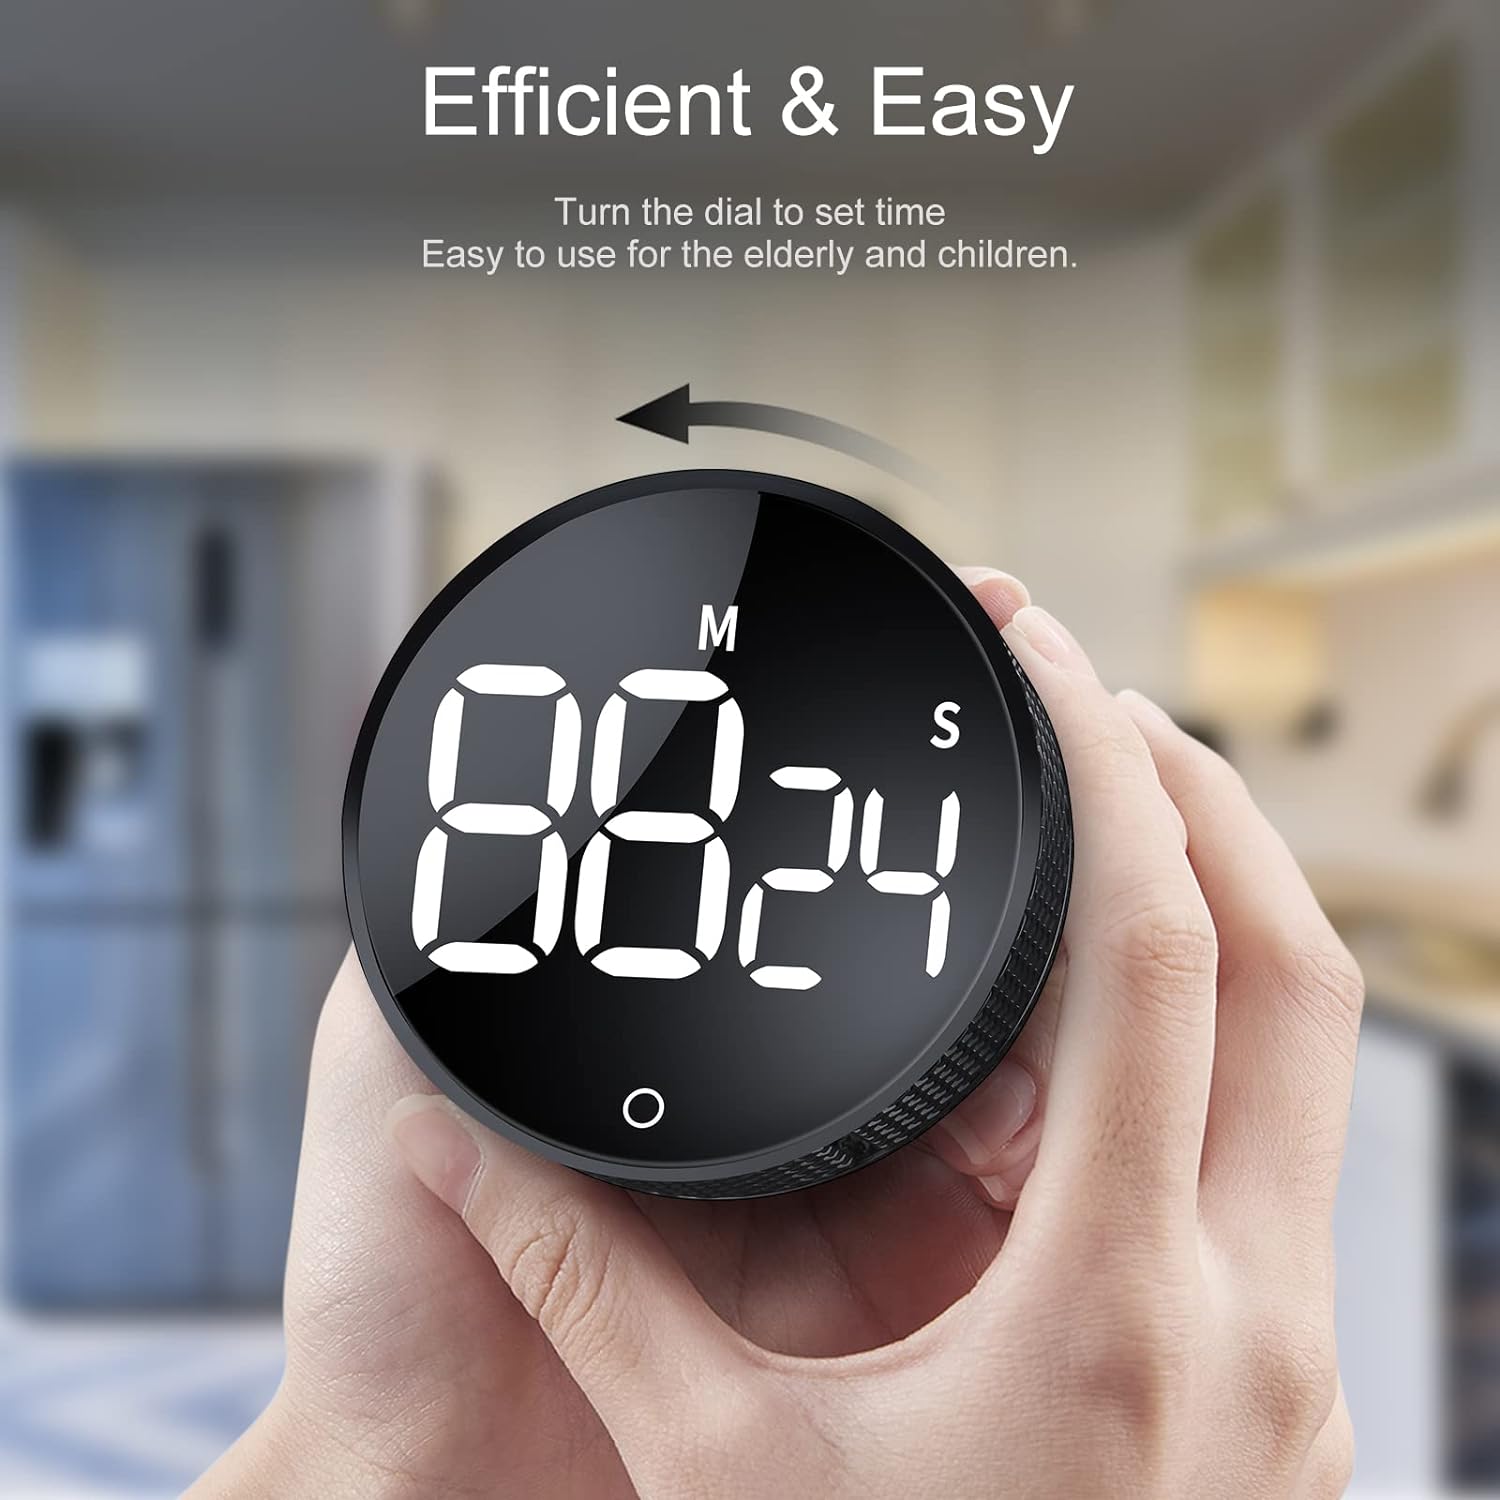 Digital Kitchen Timers, Visual timers Large LED Display Magnetic Countdown Countup Timer for Classroom Cooking Fitness Baking Studying Teaching, Easy for Kids and Seniors Black